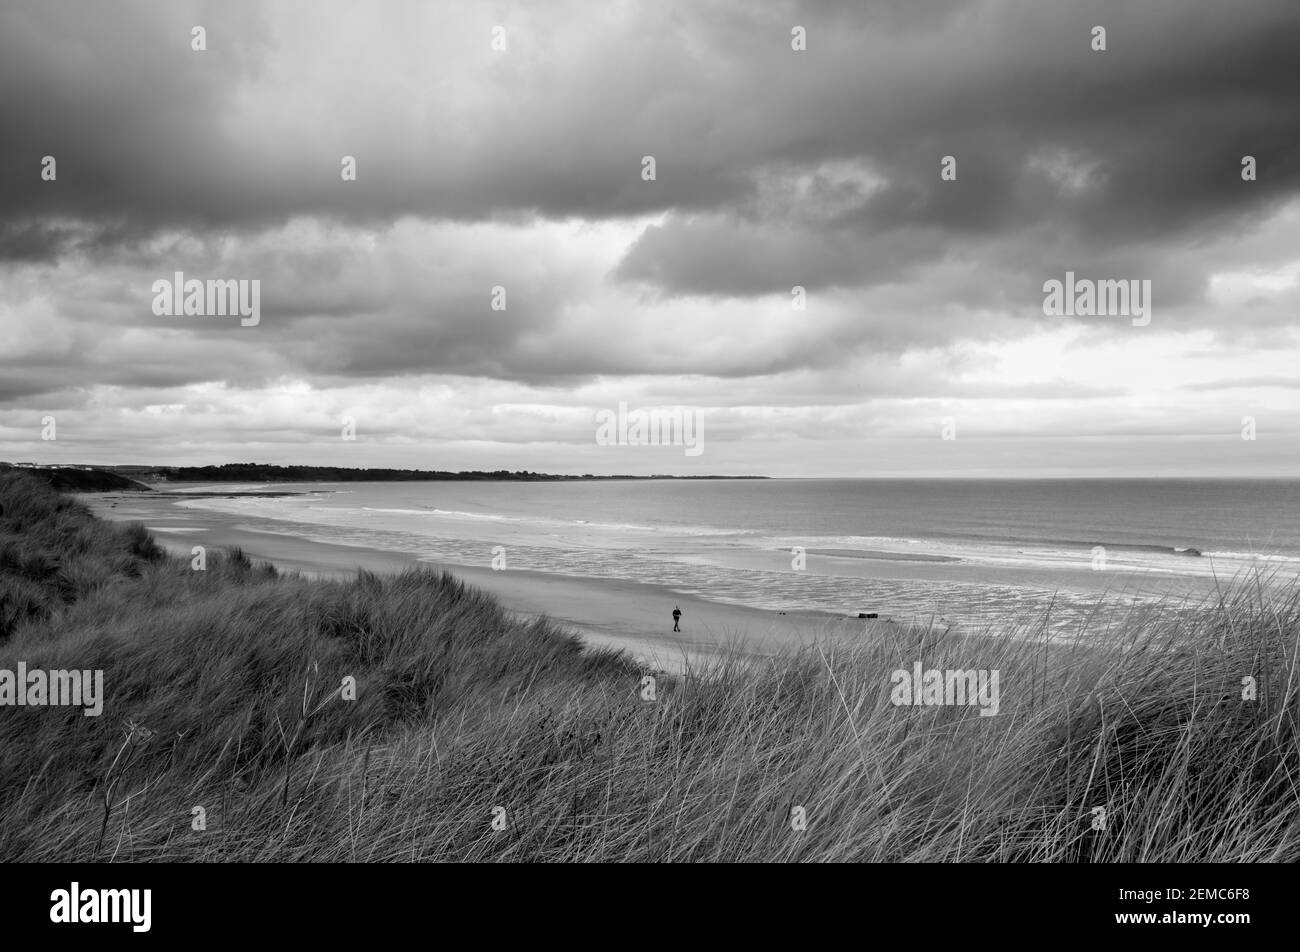 Alnmouth Bay taken from the dunes at Warkworth, Northumberland, England, UK Stock Photo